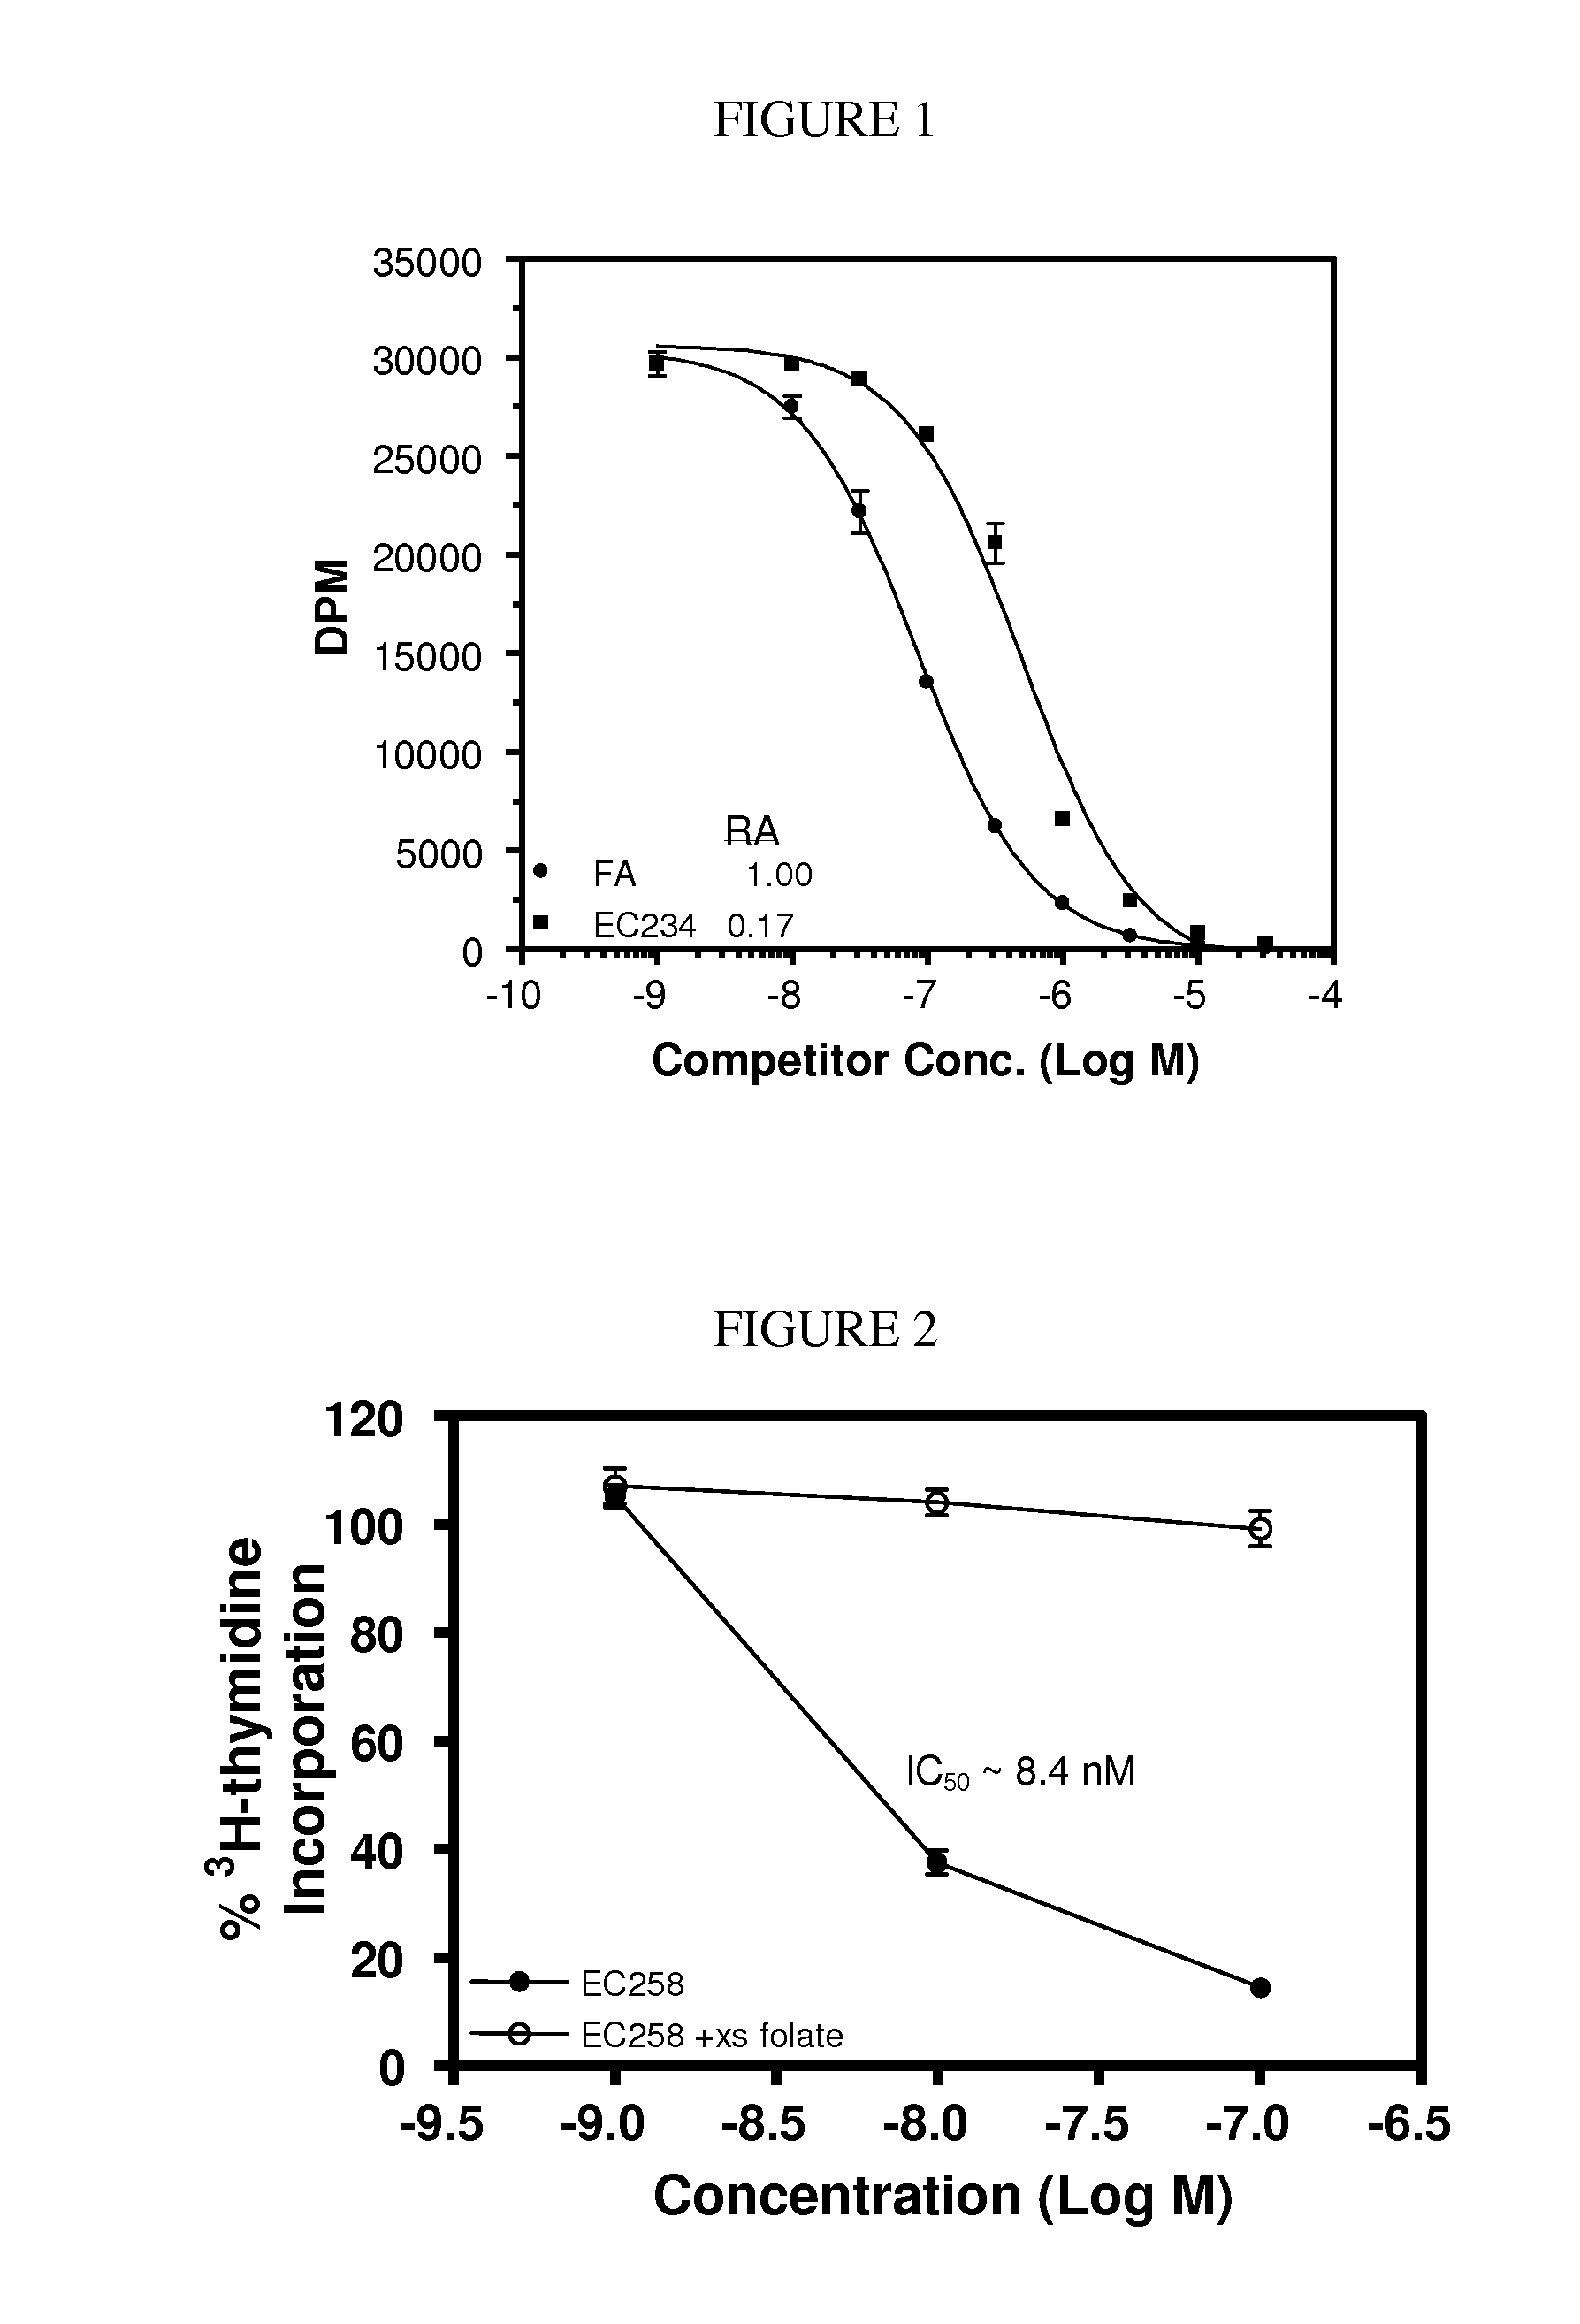 Conjugates containing hydrophilic spacer linkers